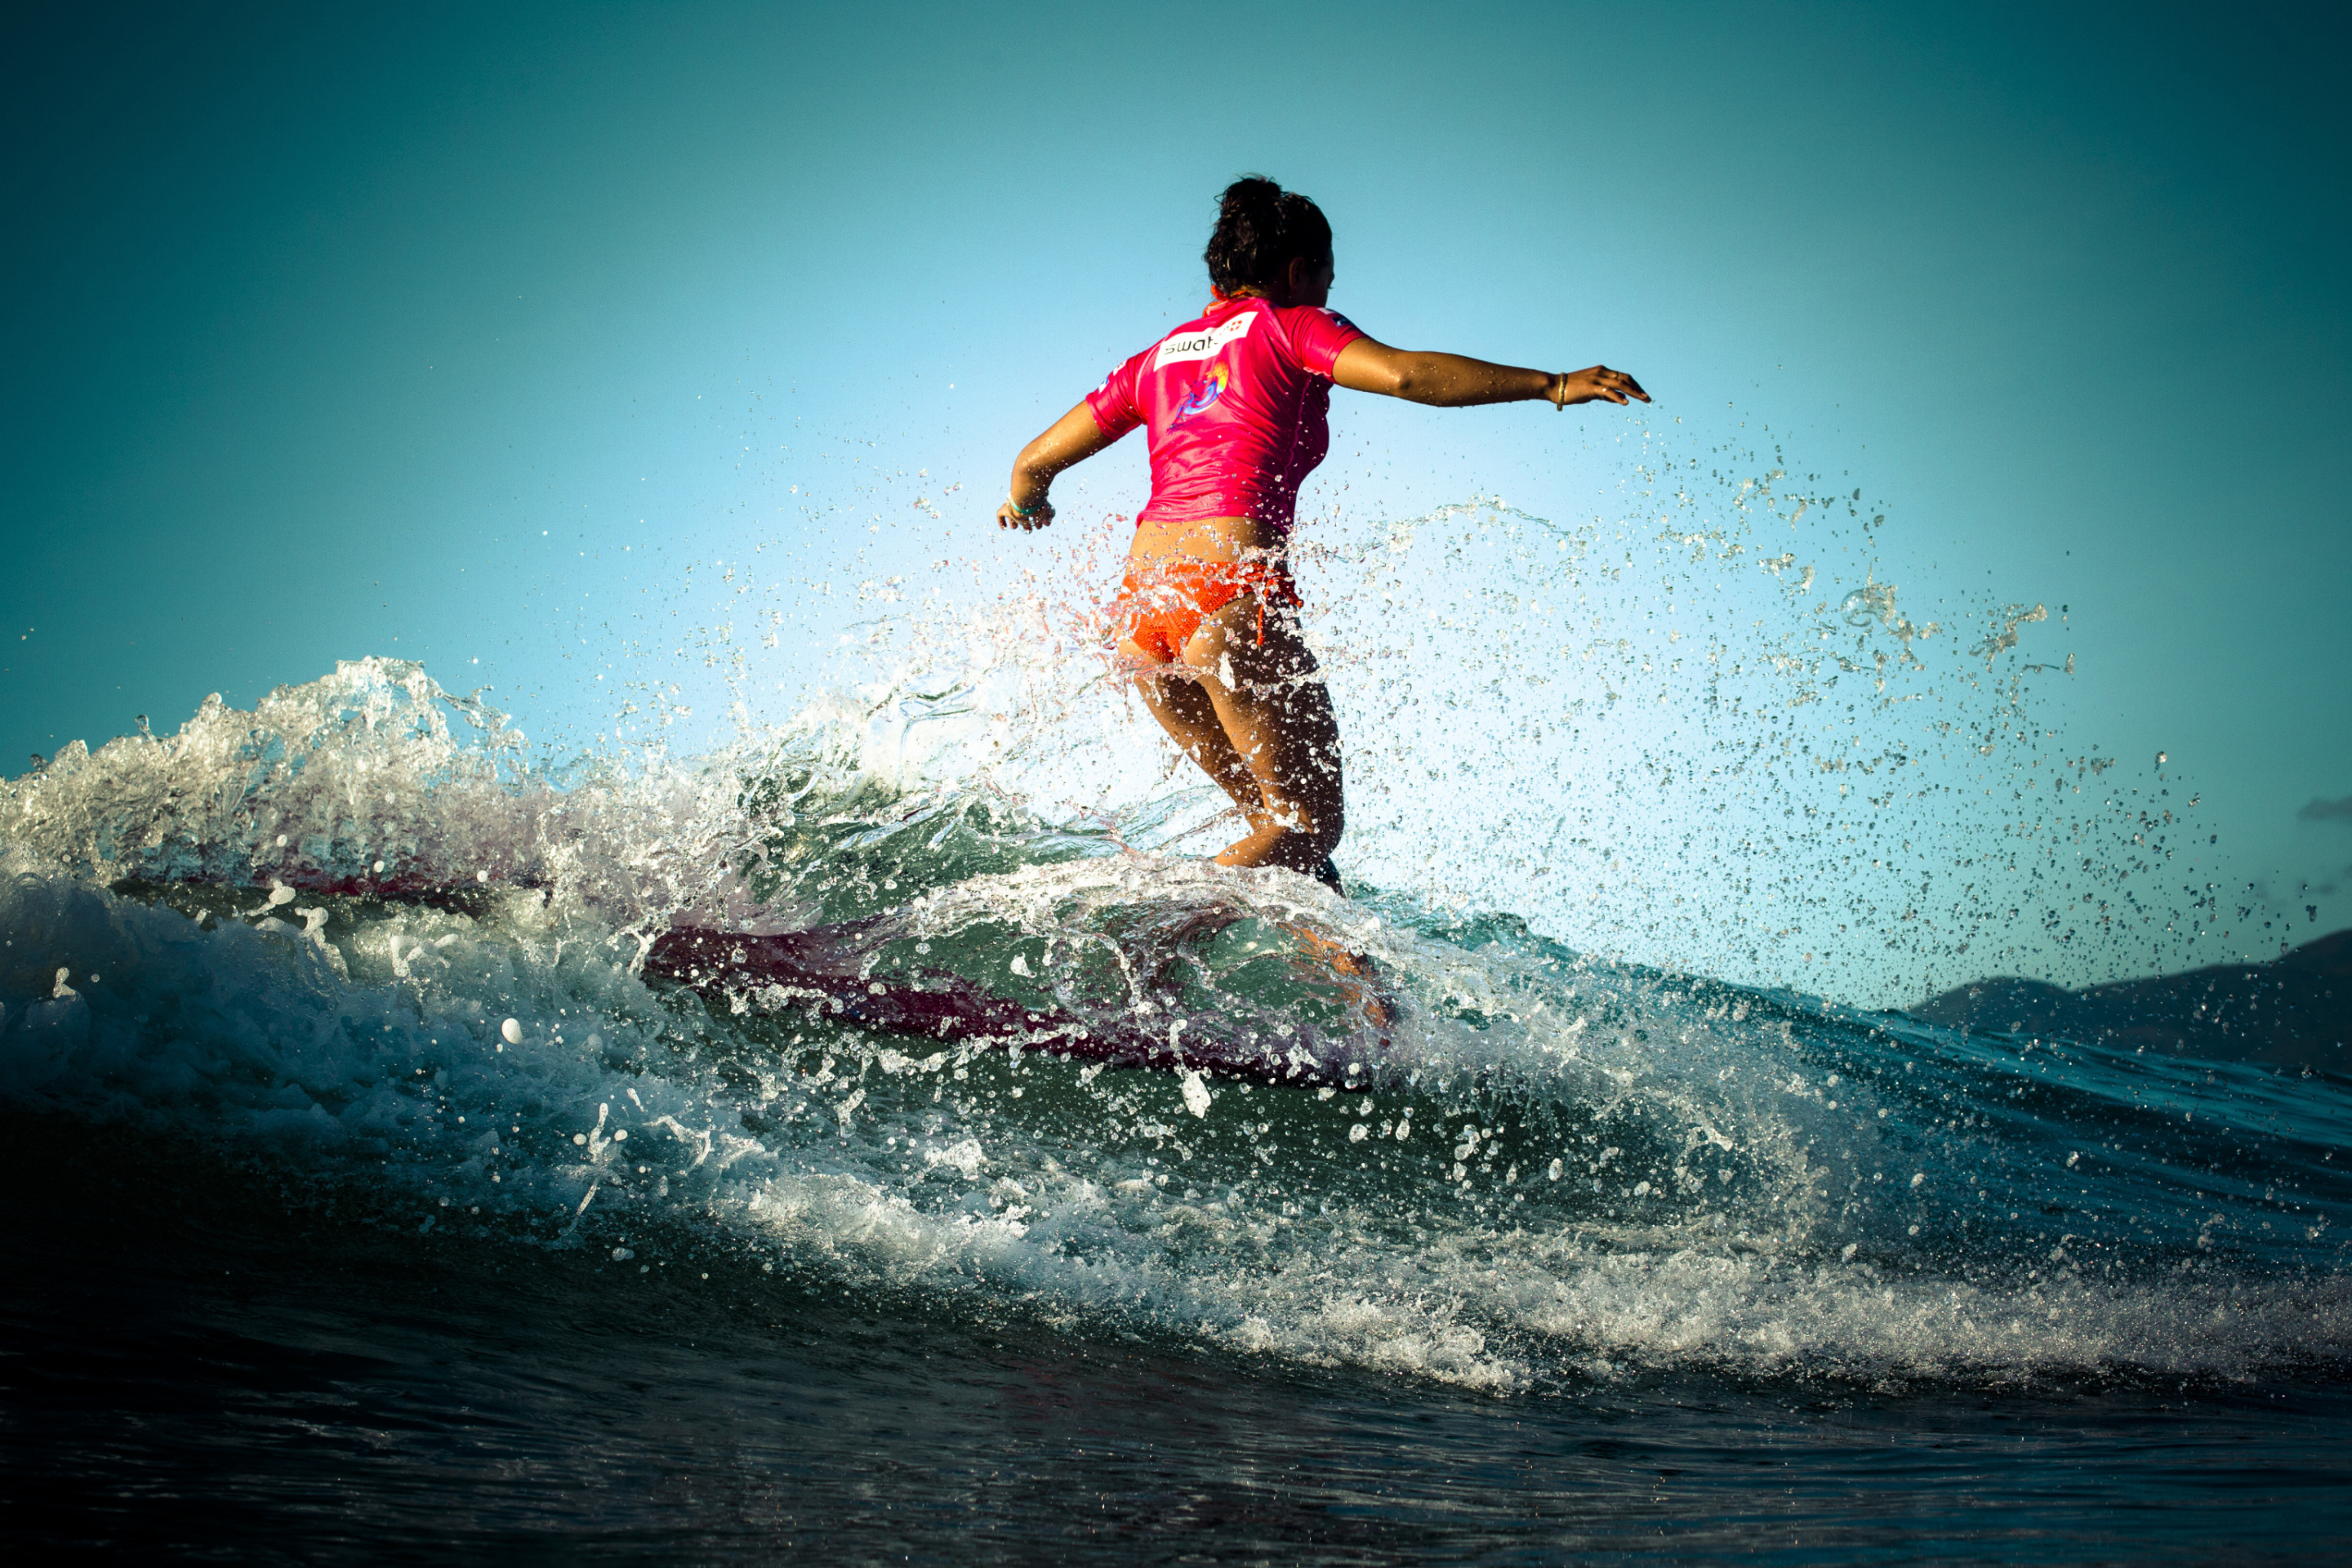 Colorful Surfing wallpaper 2880x1920